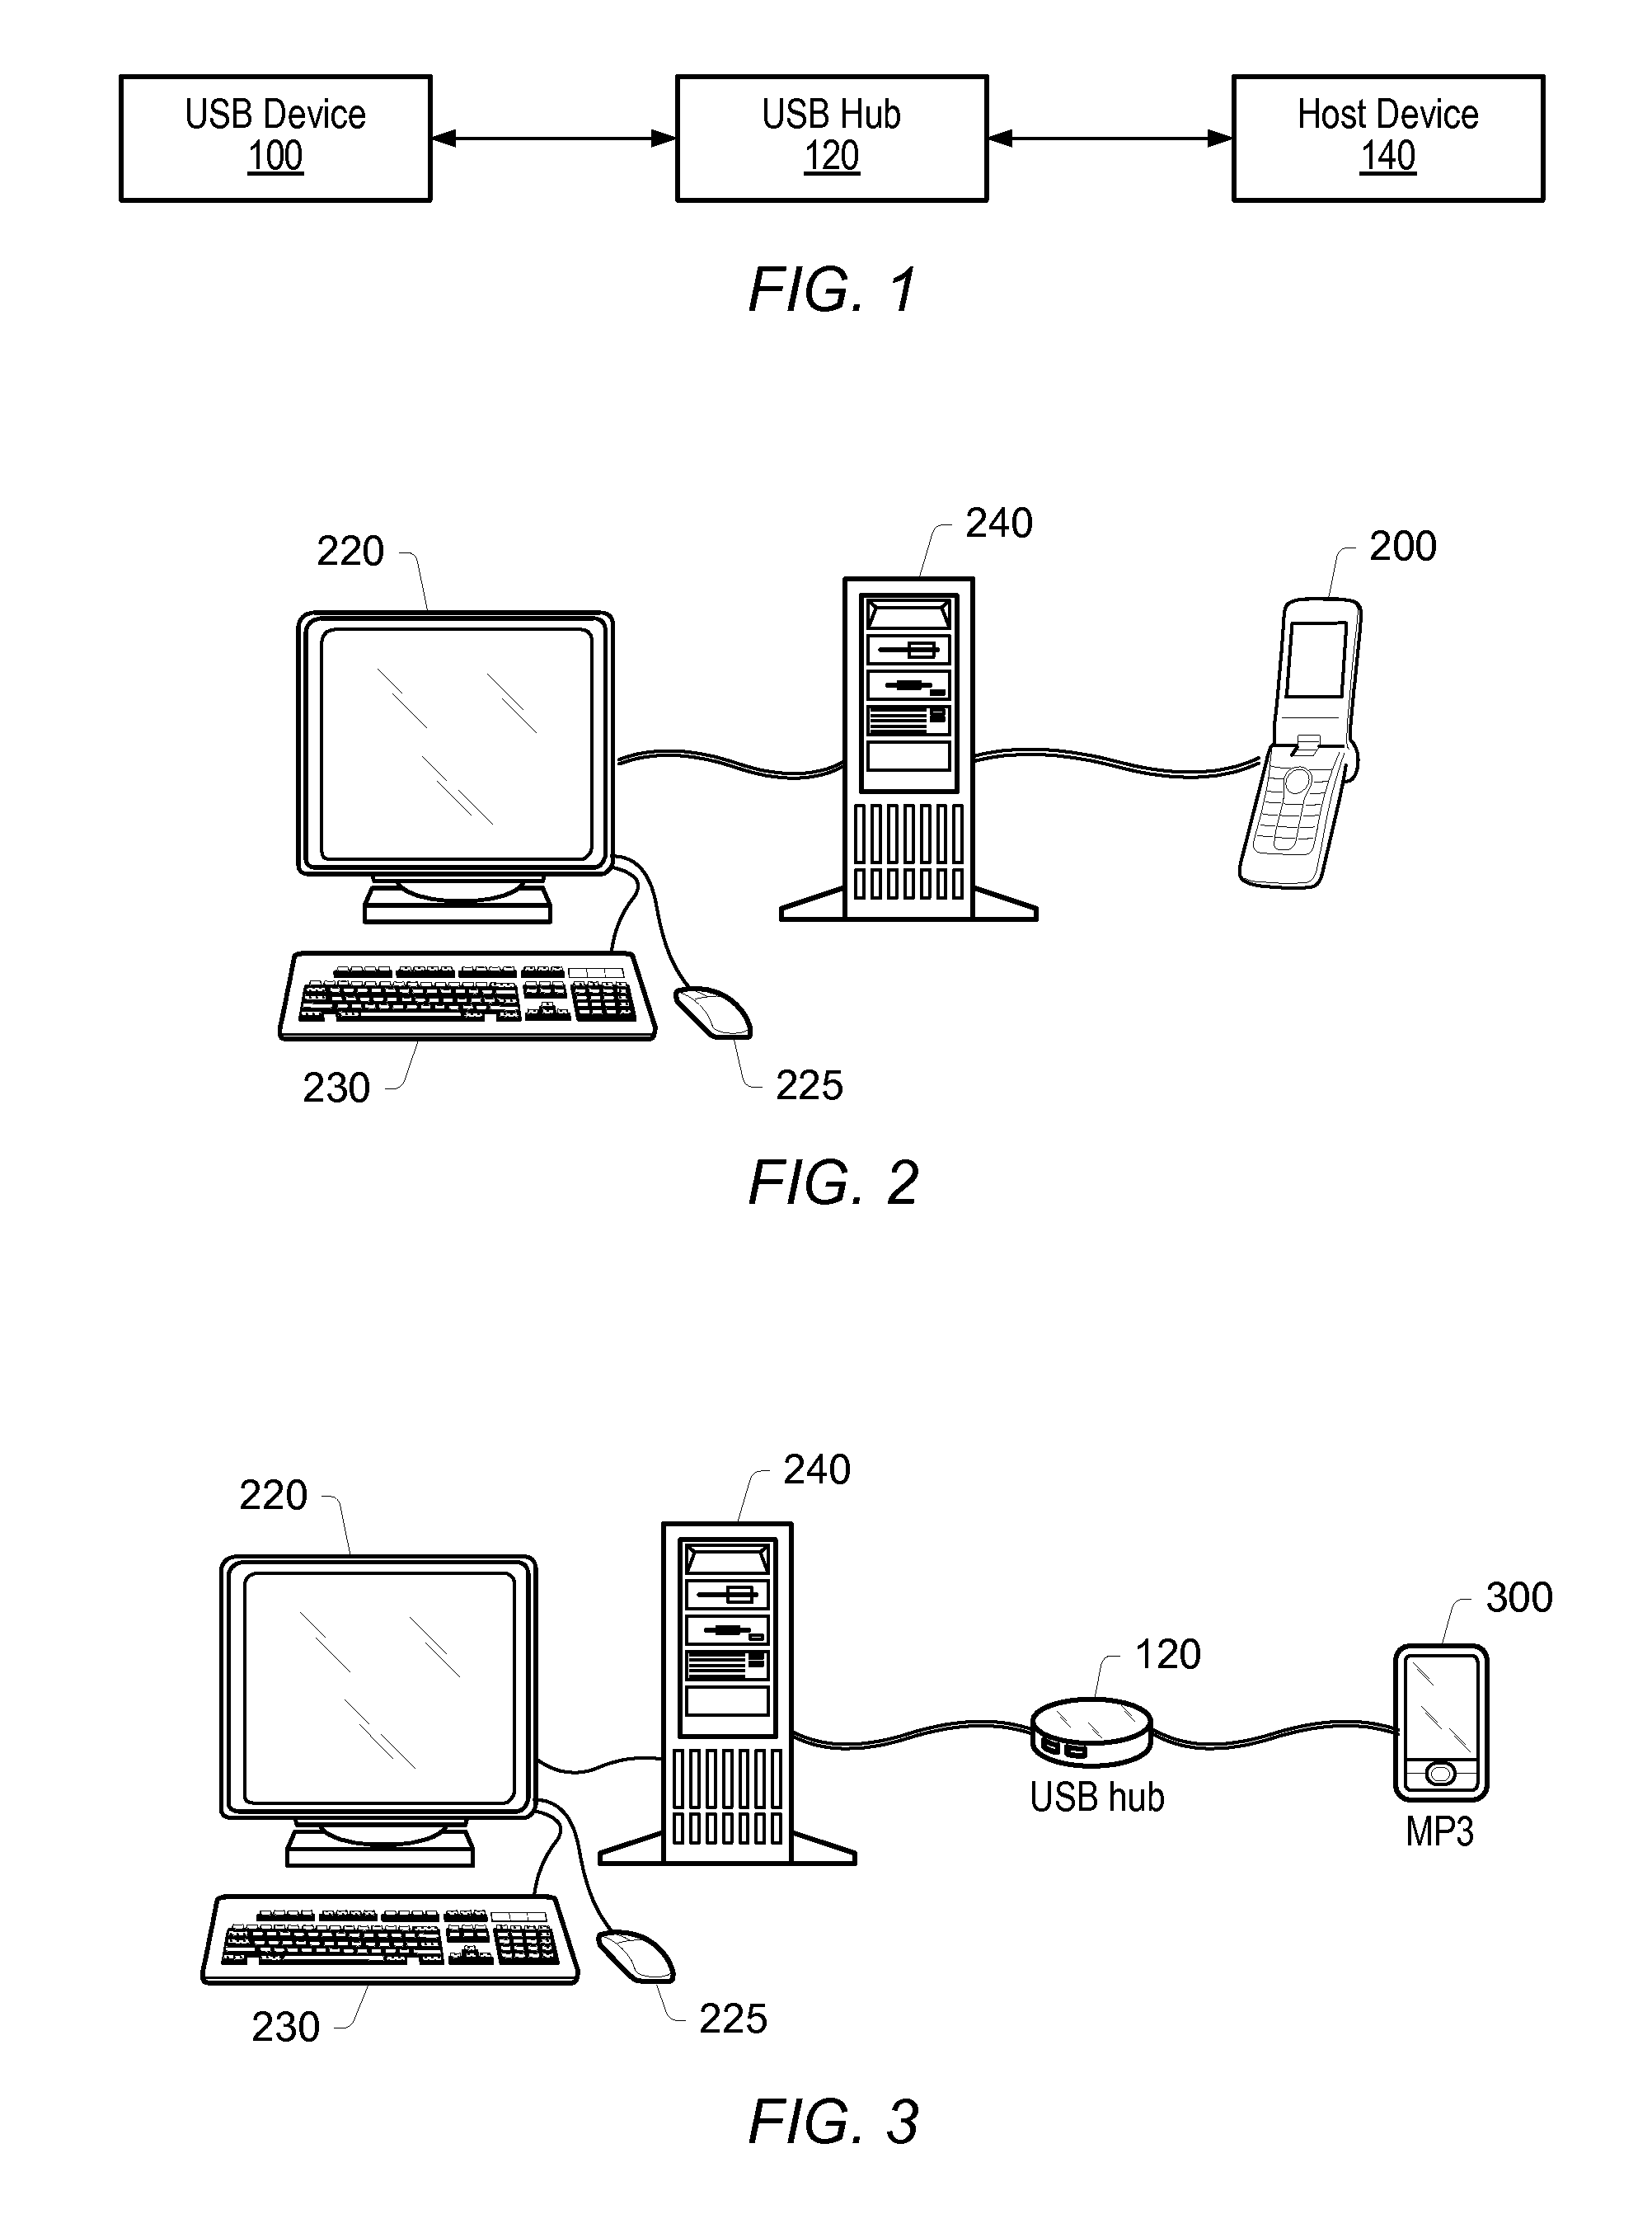 System method for rapidly charging USB device's battery wherein USB device requests charging the battery at a higher power level